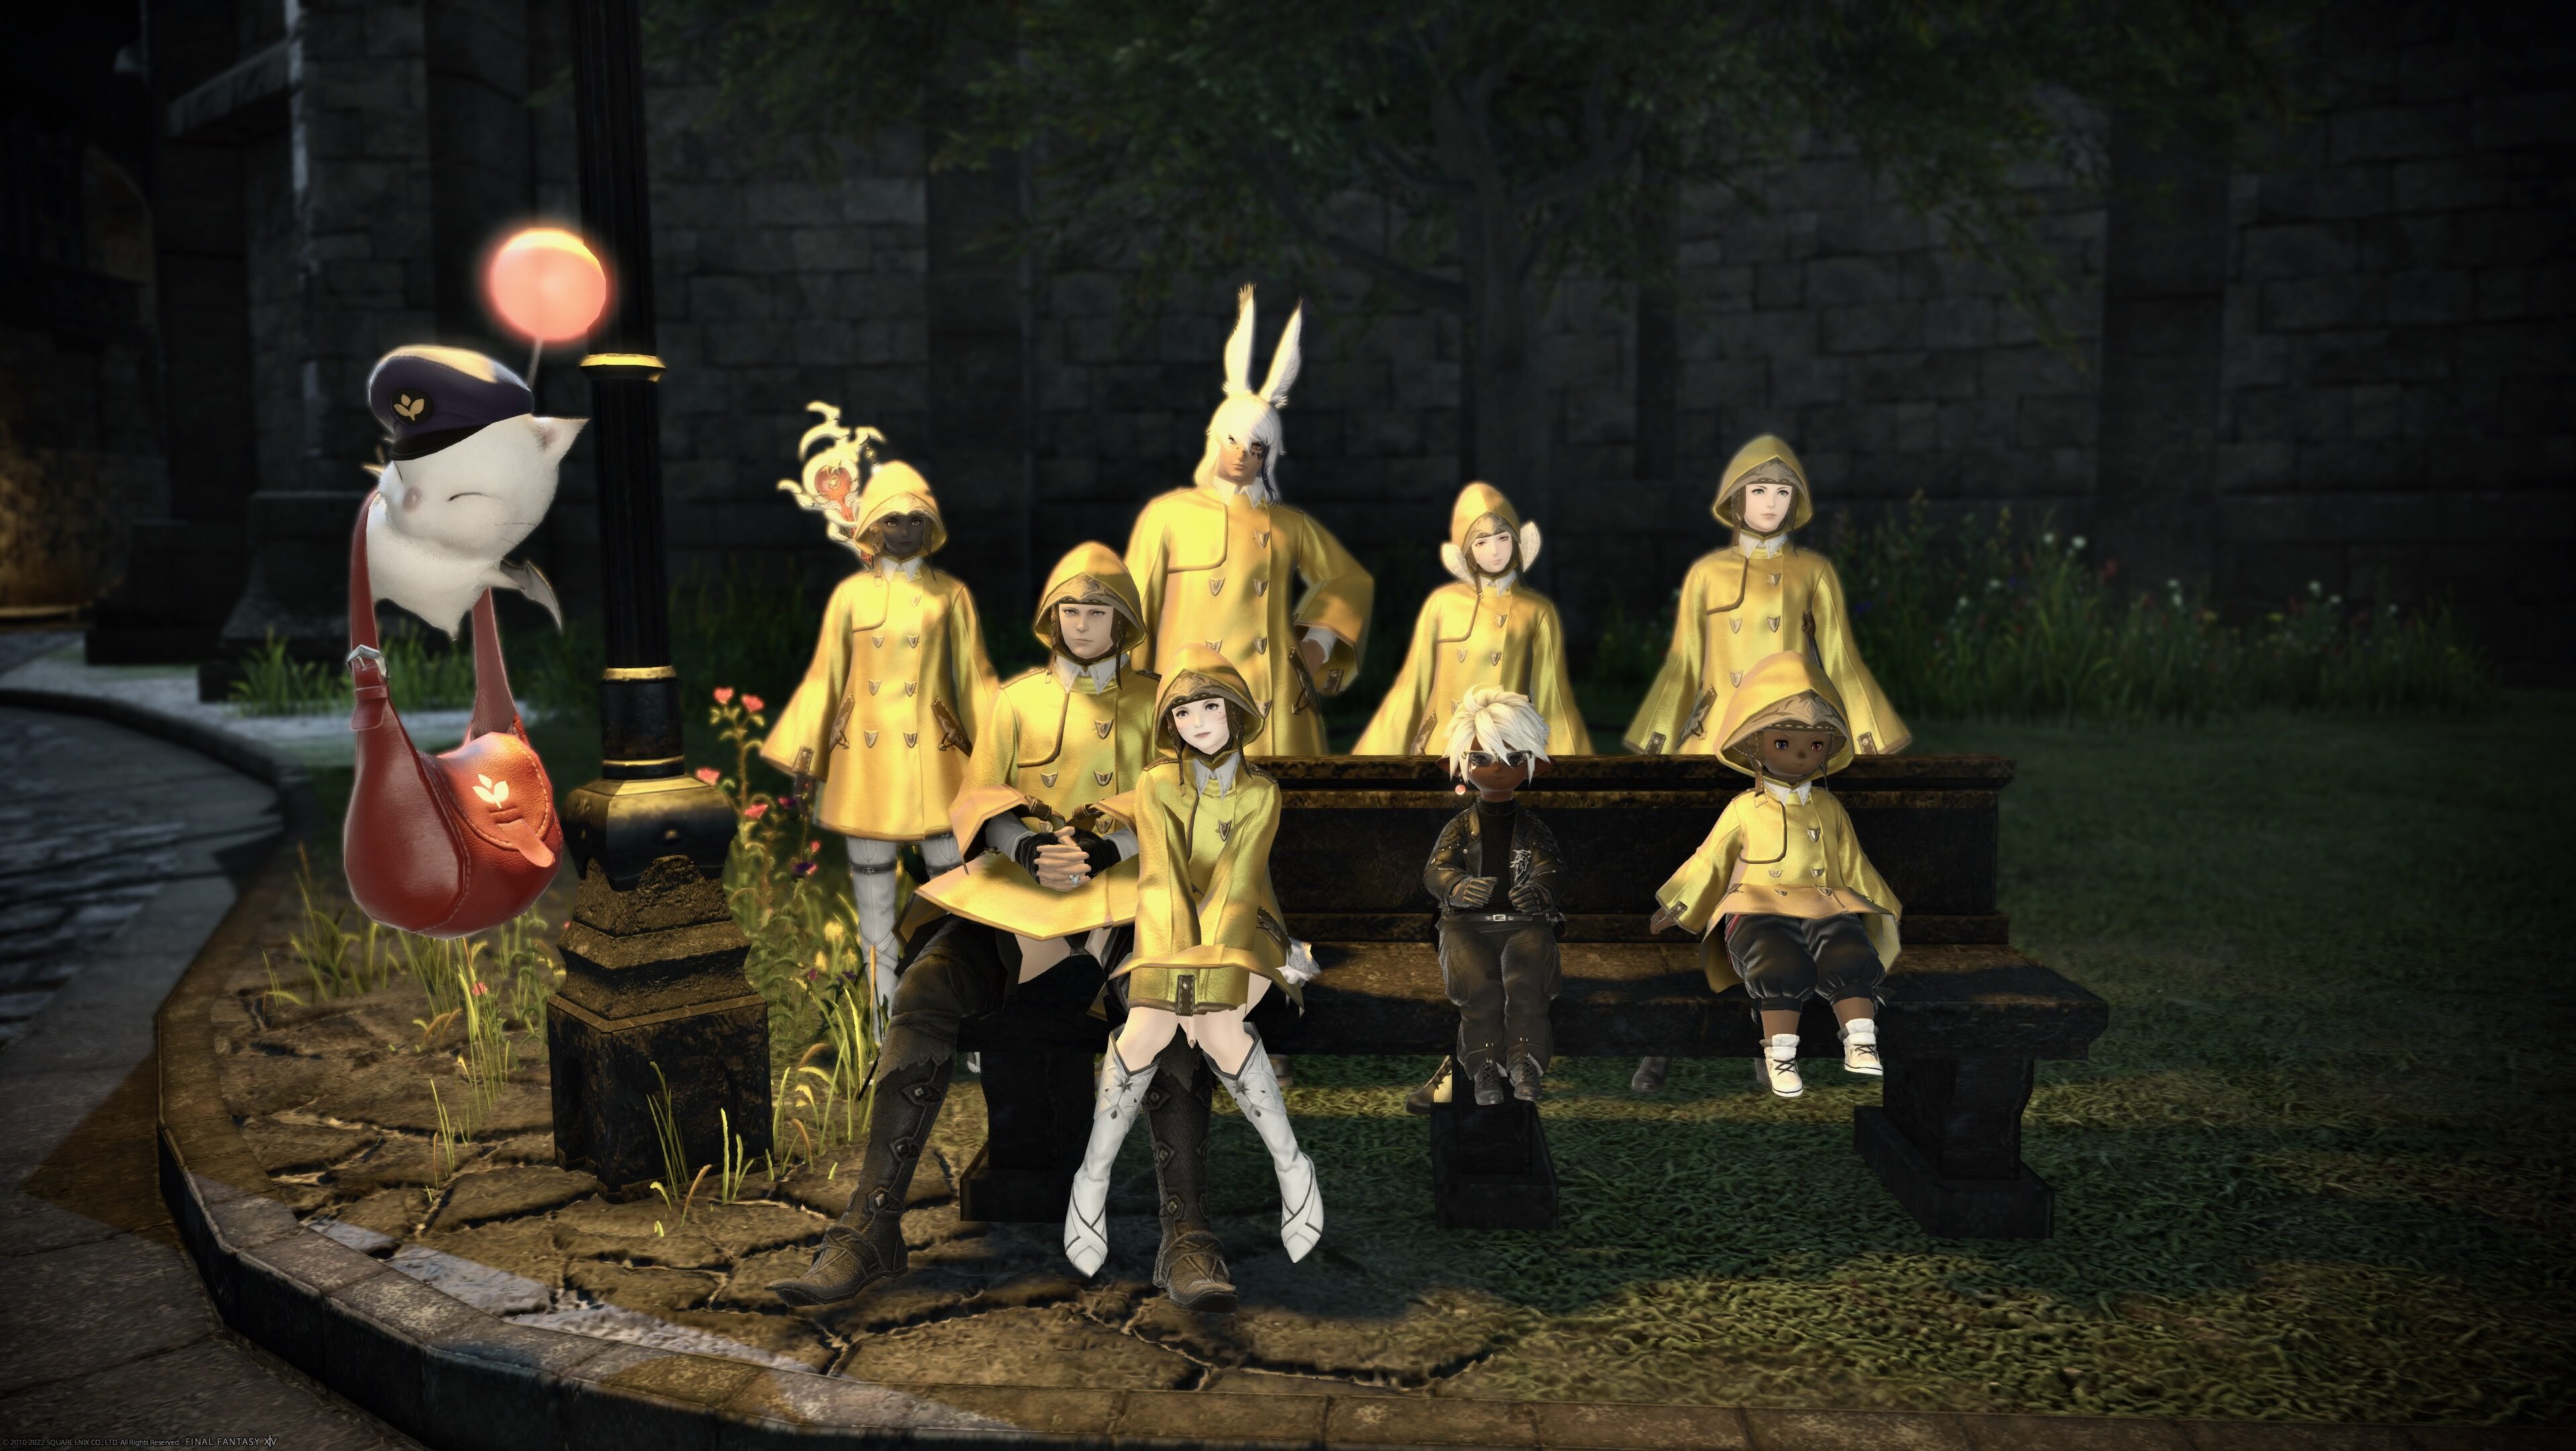 Final Fantasy creator launches clothing brand SakaGUCCI in FF14 game